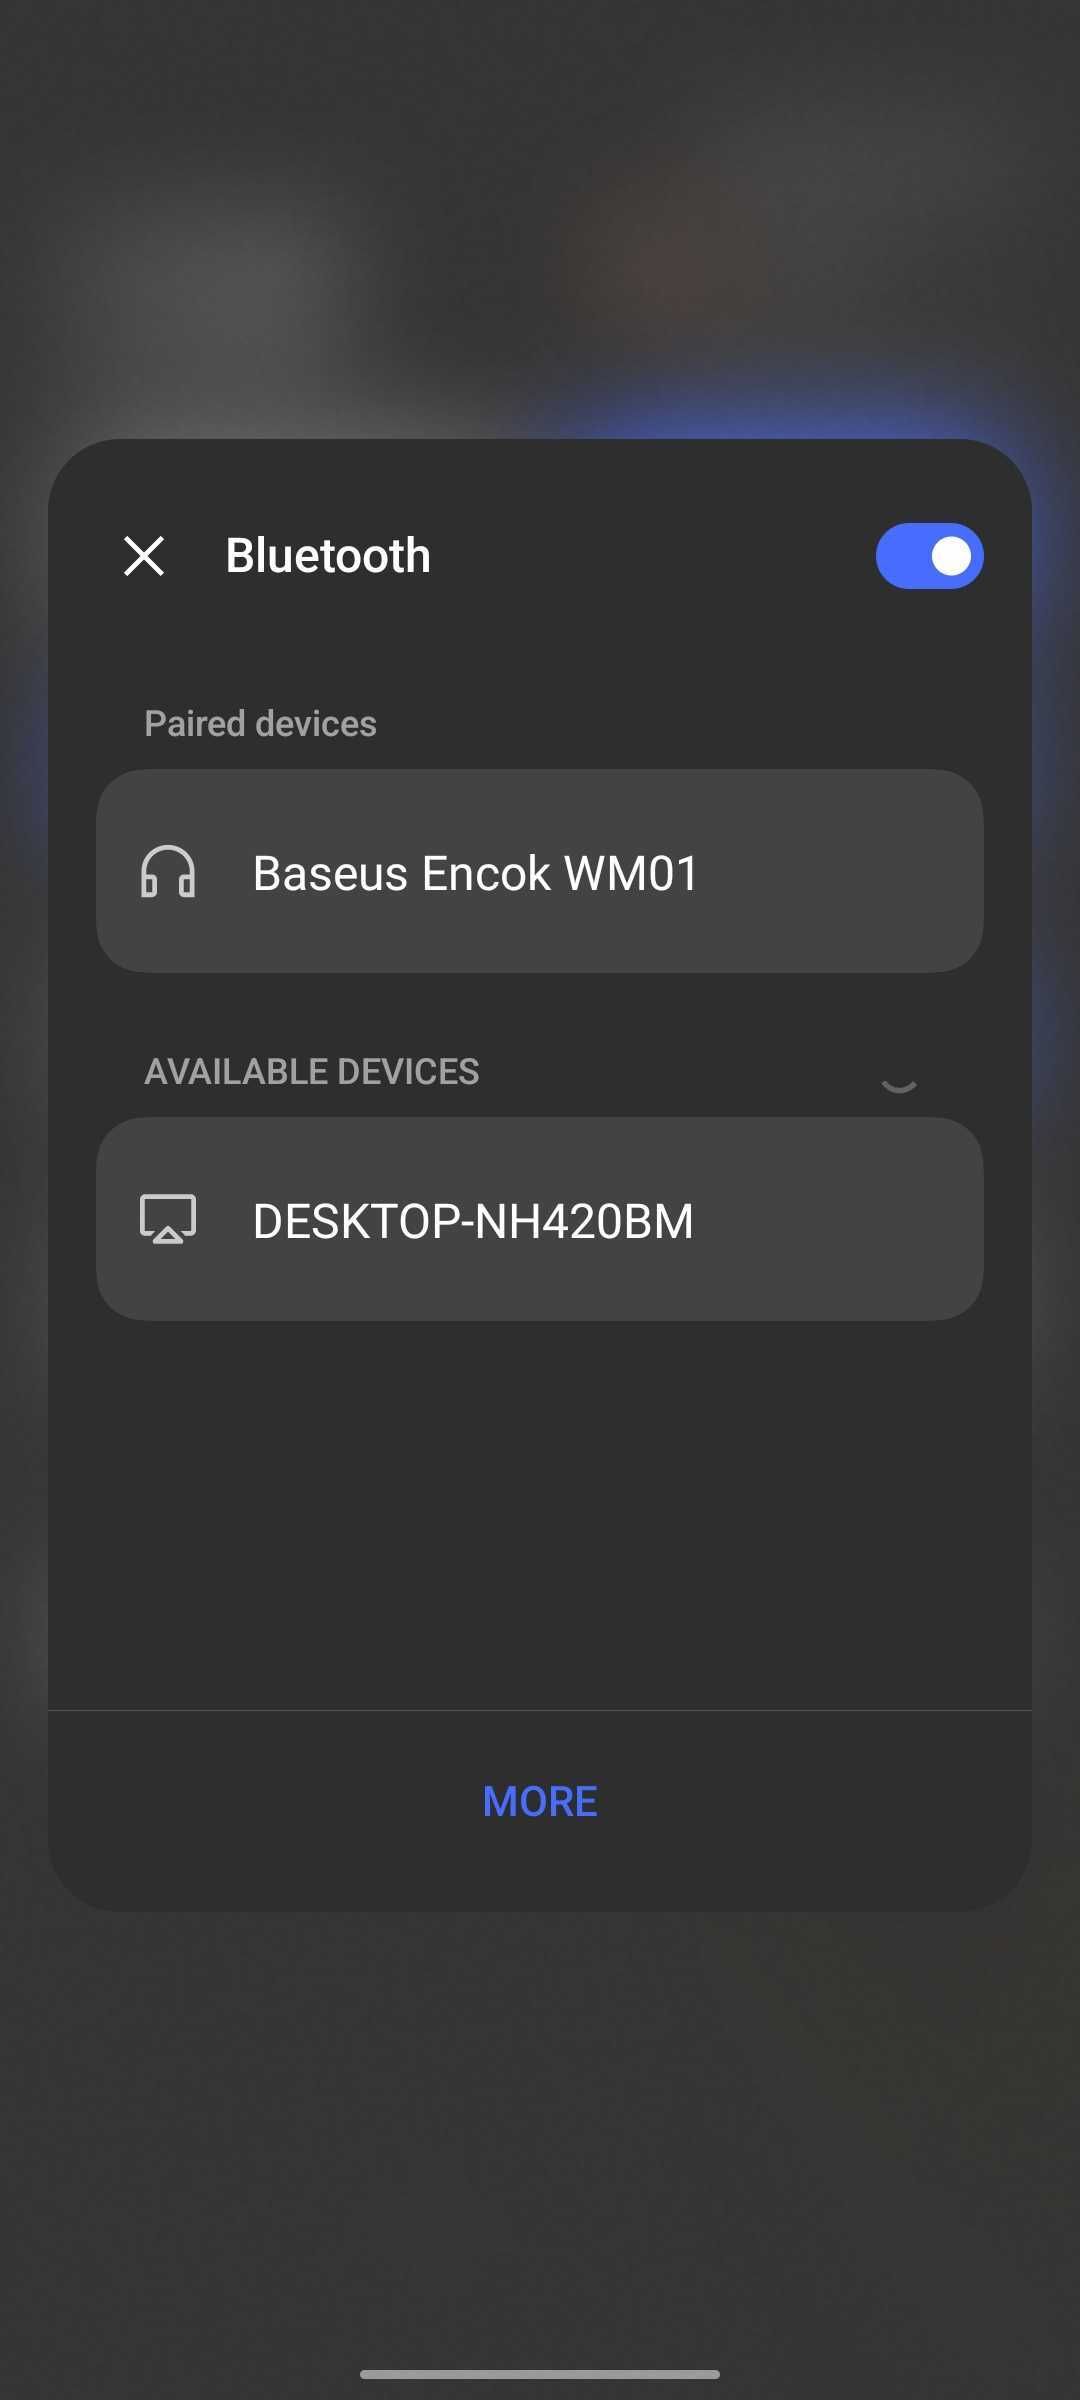 Choose an available Bluetooth device to connect